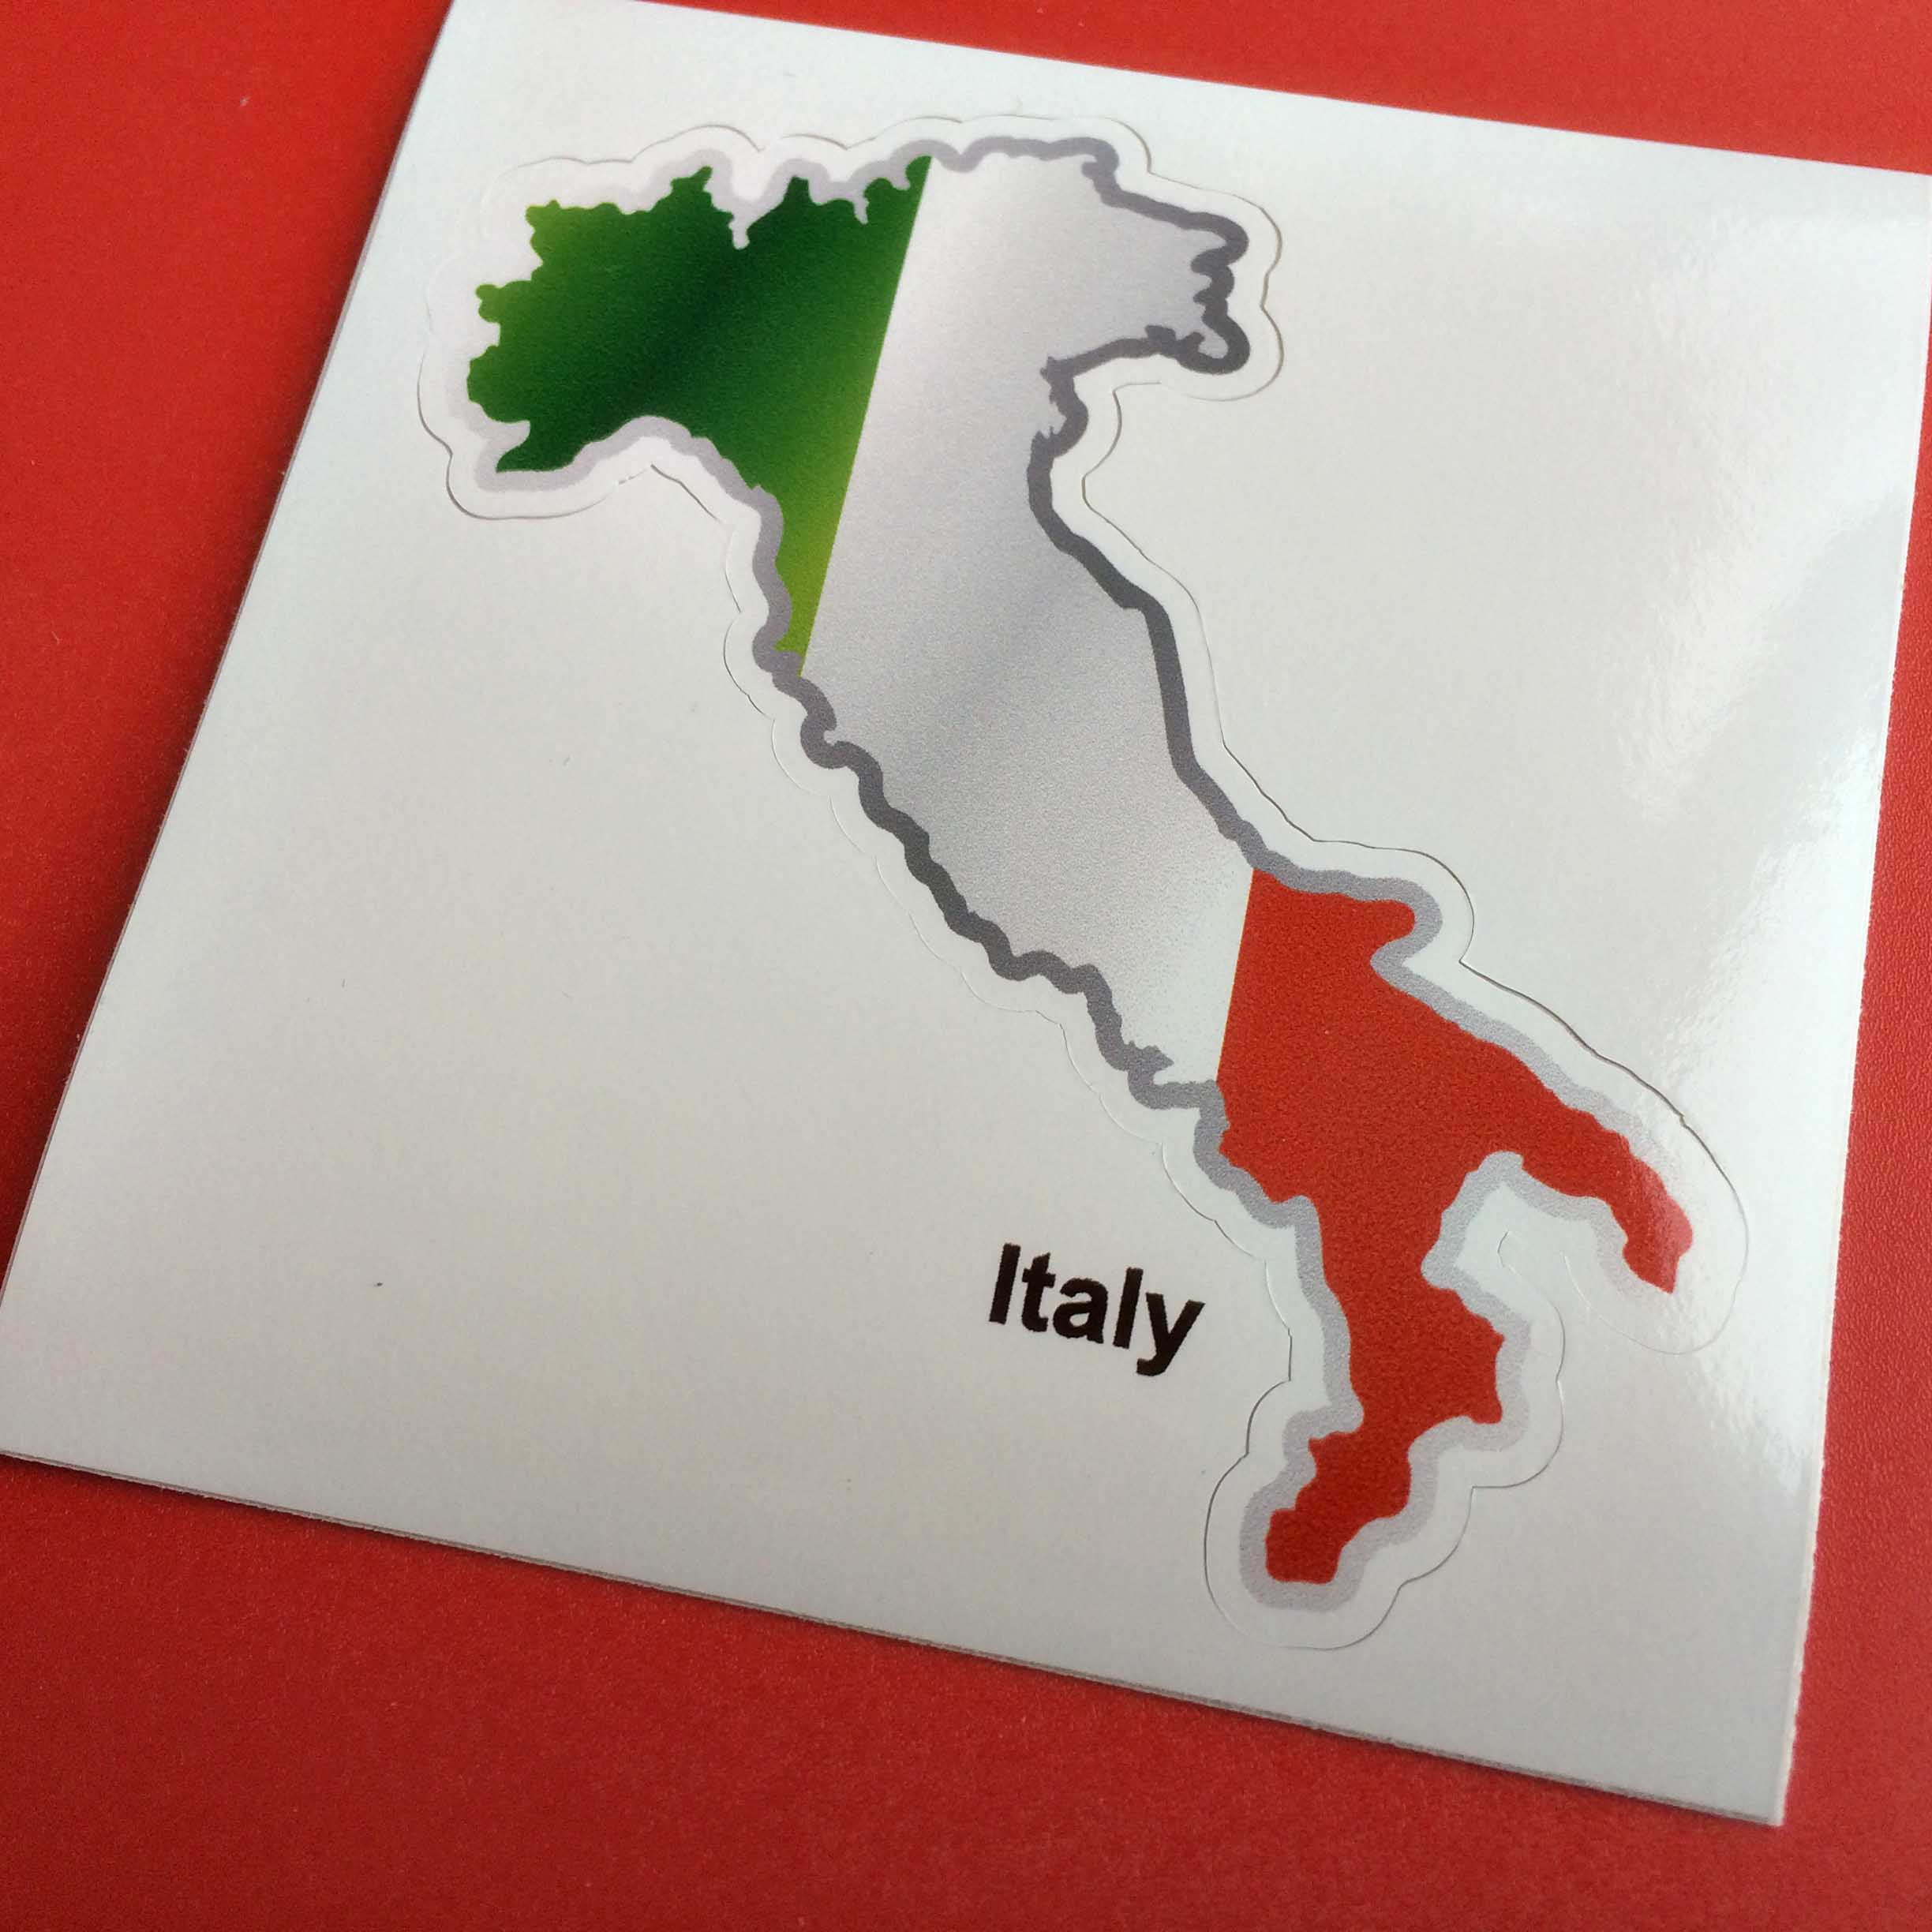 ITALY FLAG AND MAP STICKERS. The green, white and red flag and map of Italy.